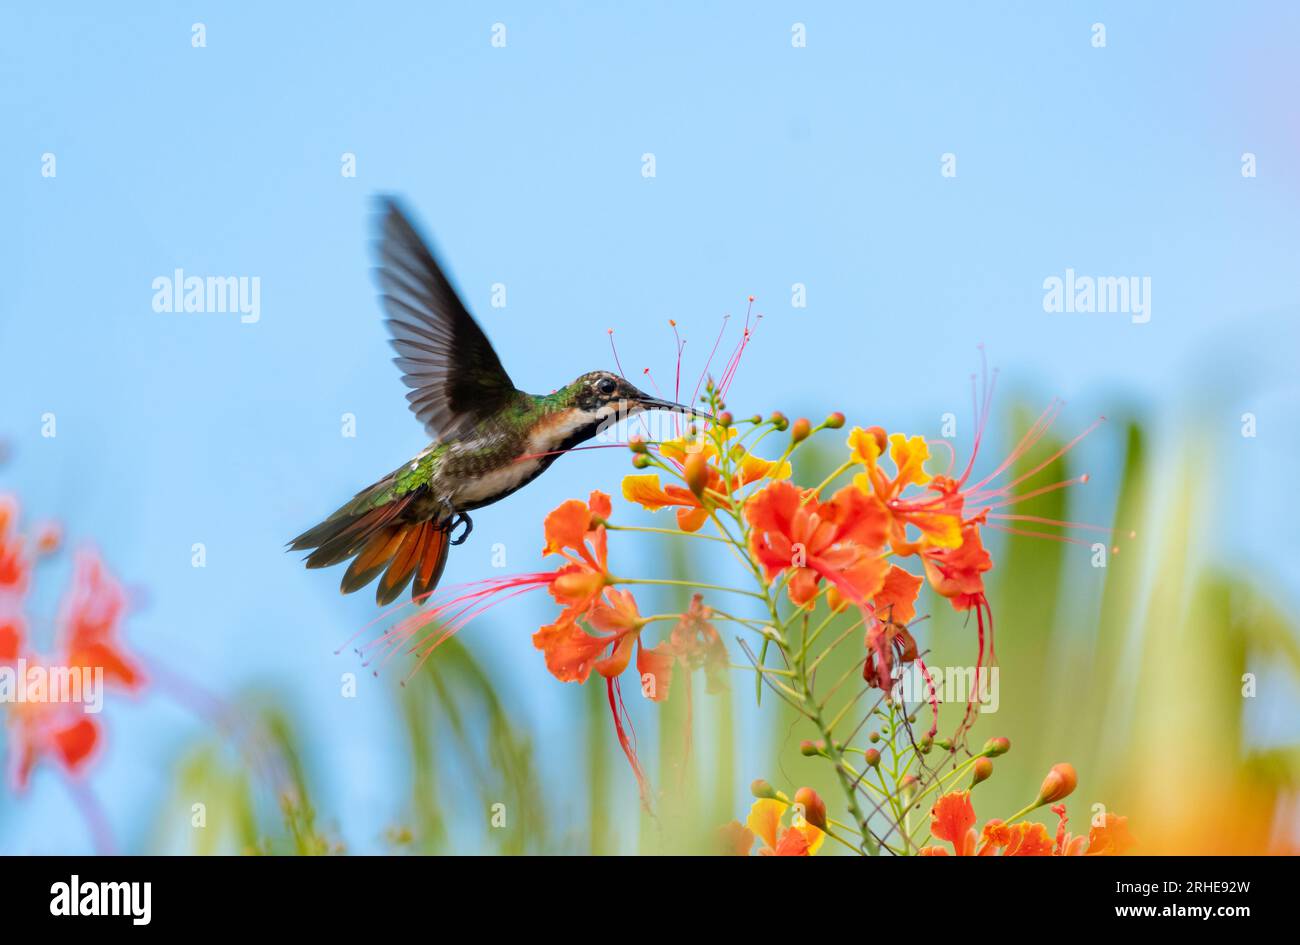 Colorful photo of a Black-throated Mango hummingbird, Anthracothorax nigricollis, pollinating tropical Pride of Barbados flowers Stock Photo